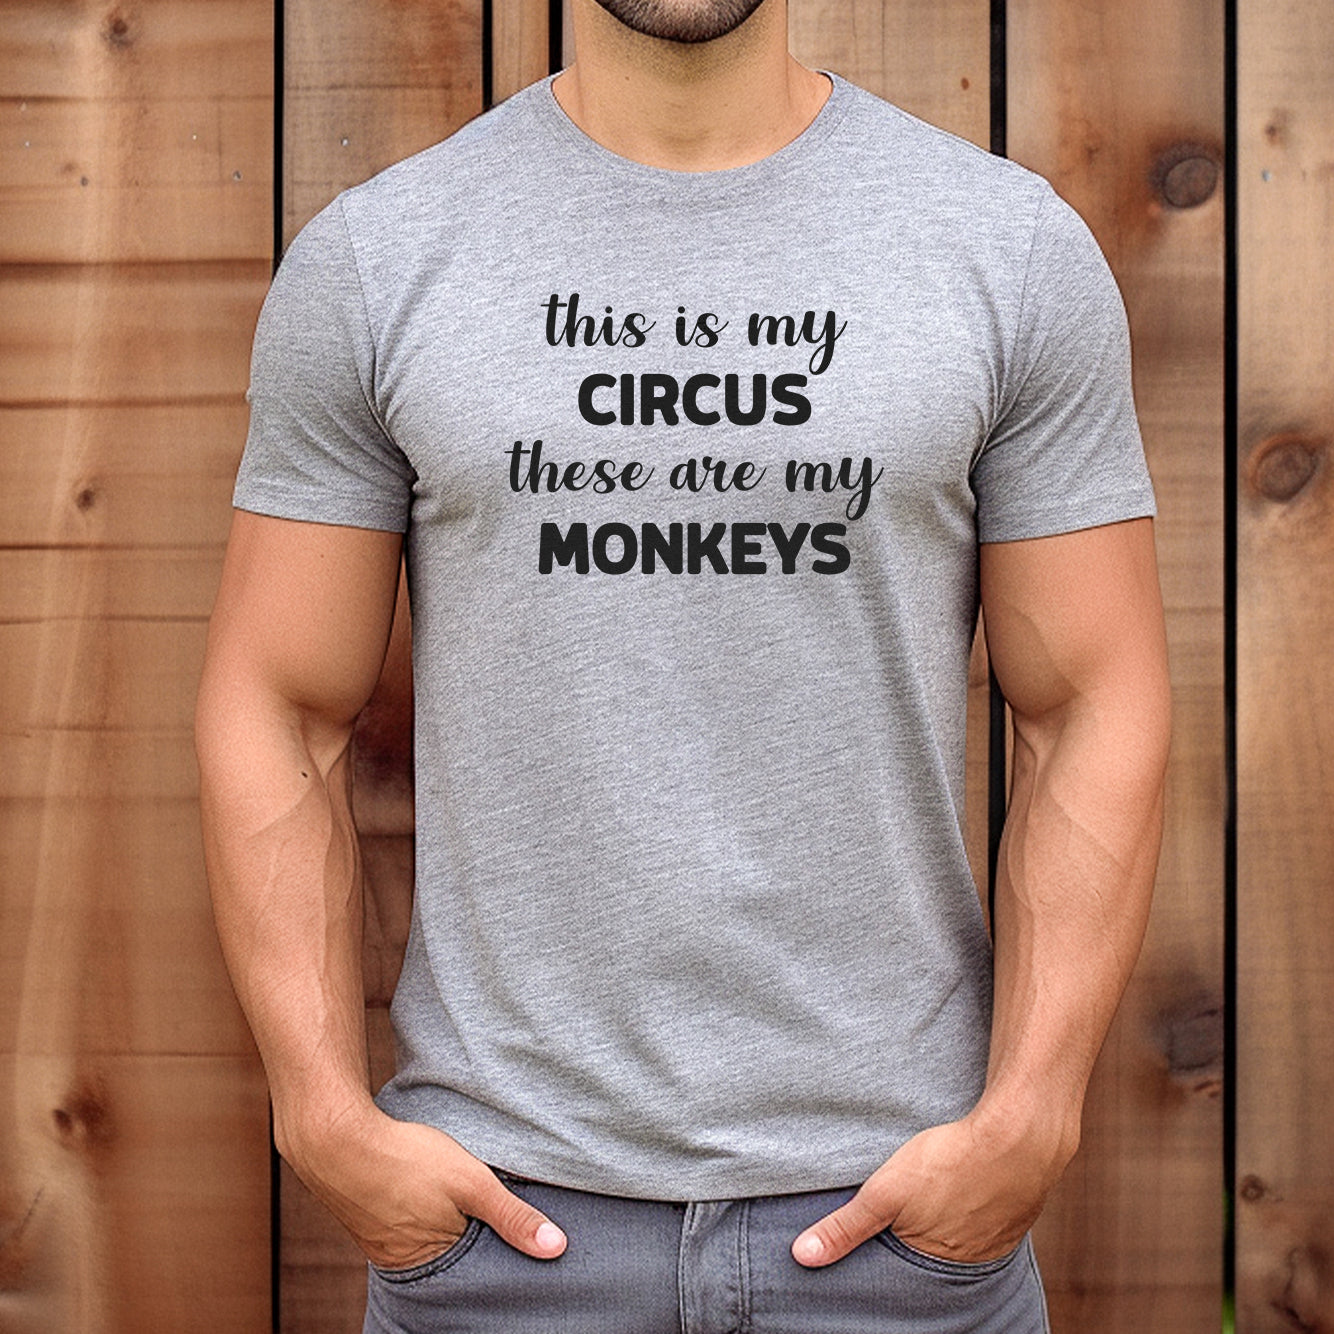 "This Is My Circus" Premium Midweight Ringspun Cotton T-Shirt - Mens/Womens Fits